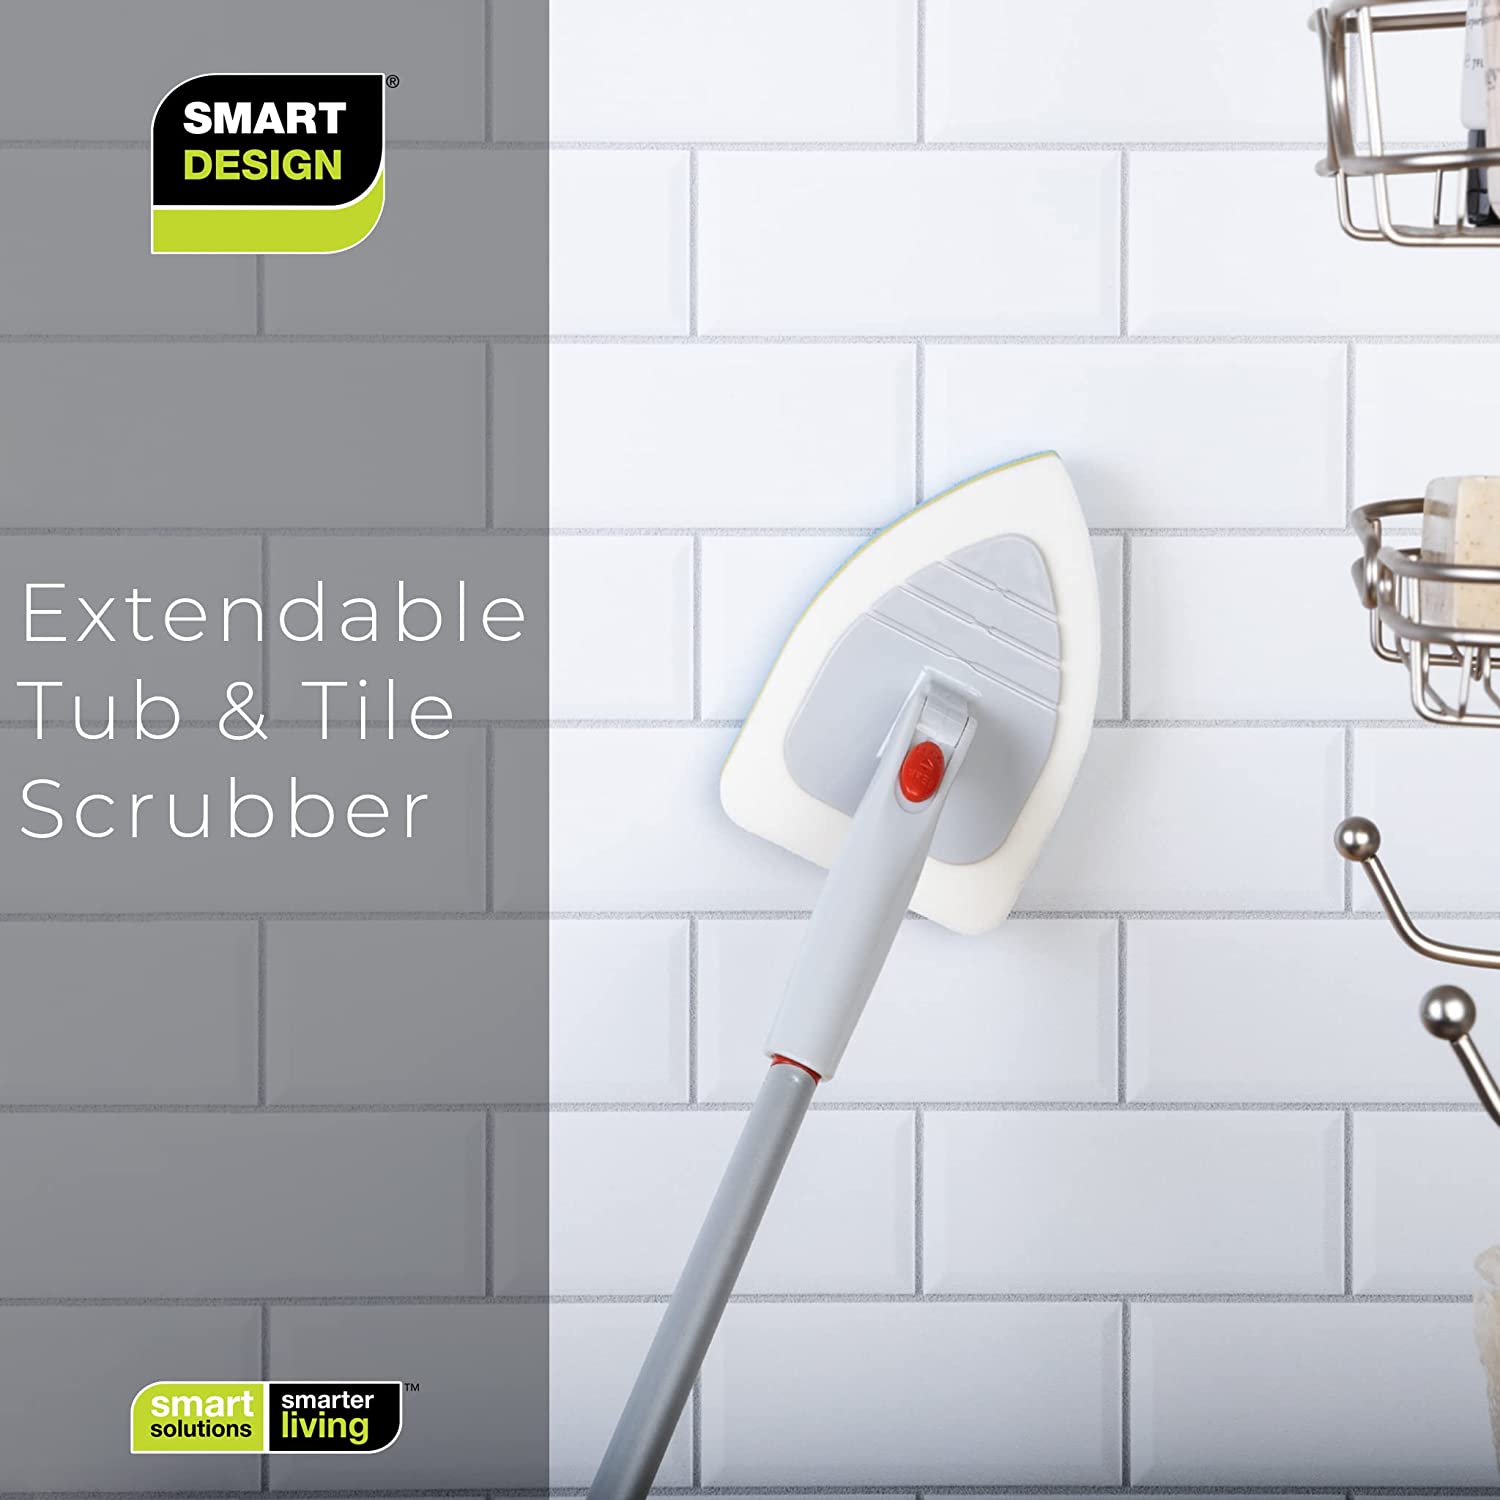 Extendable Tub and Tile Scrubber - Smart Design® 7